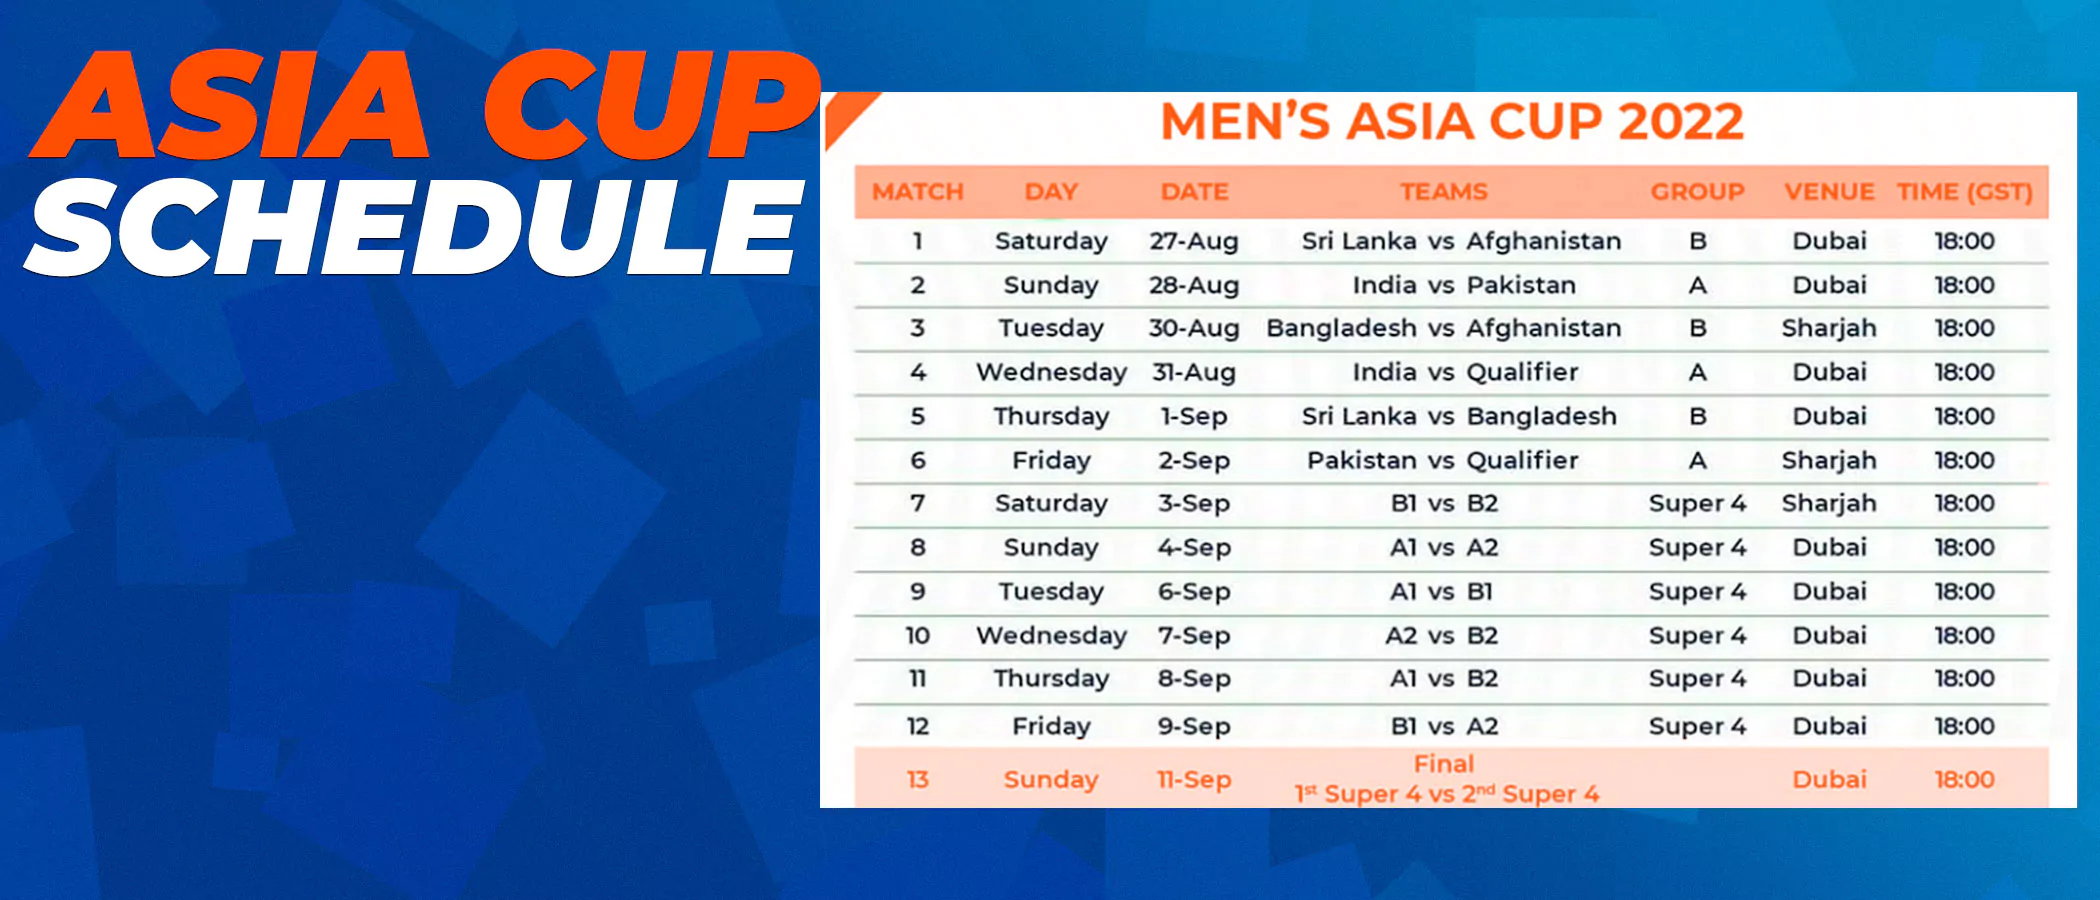 All matches in the Asia Cup.